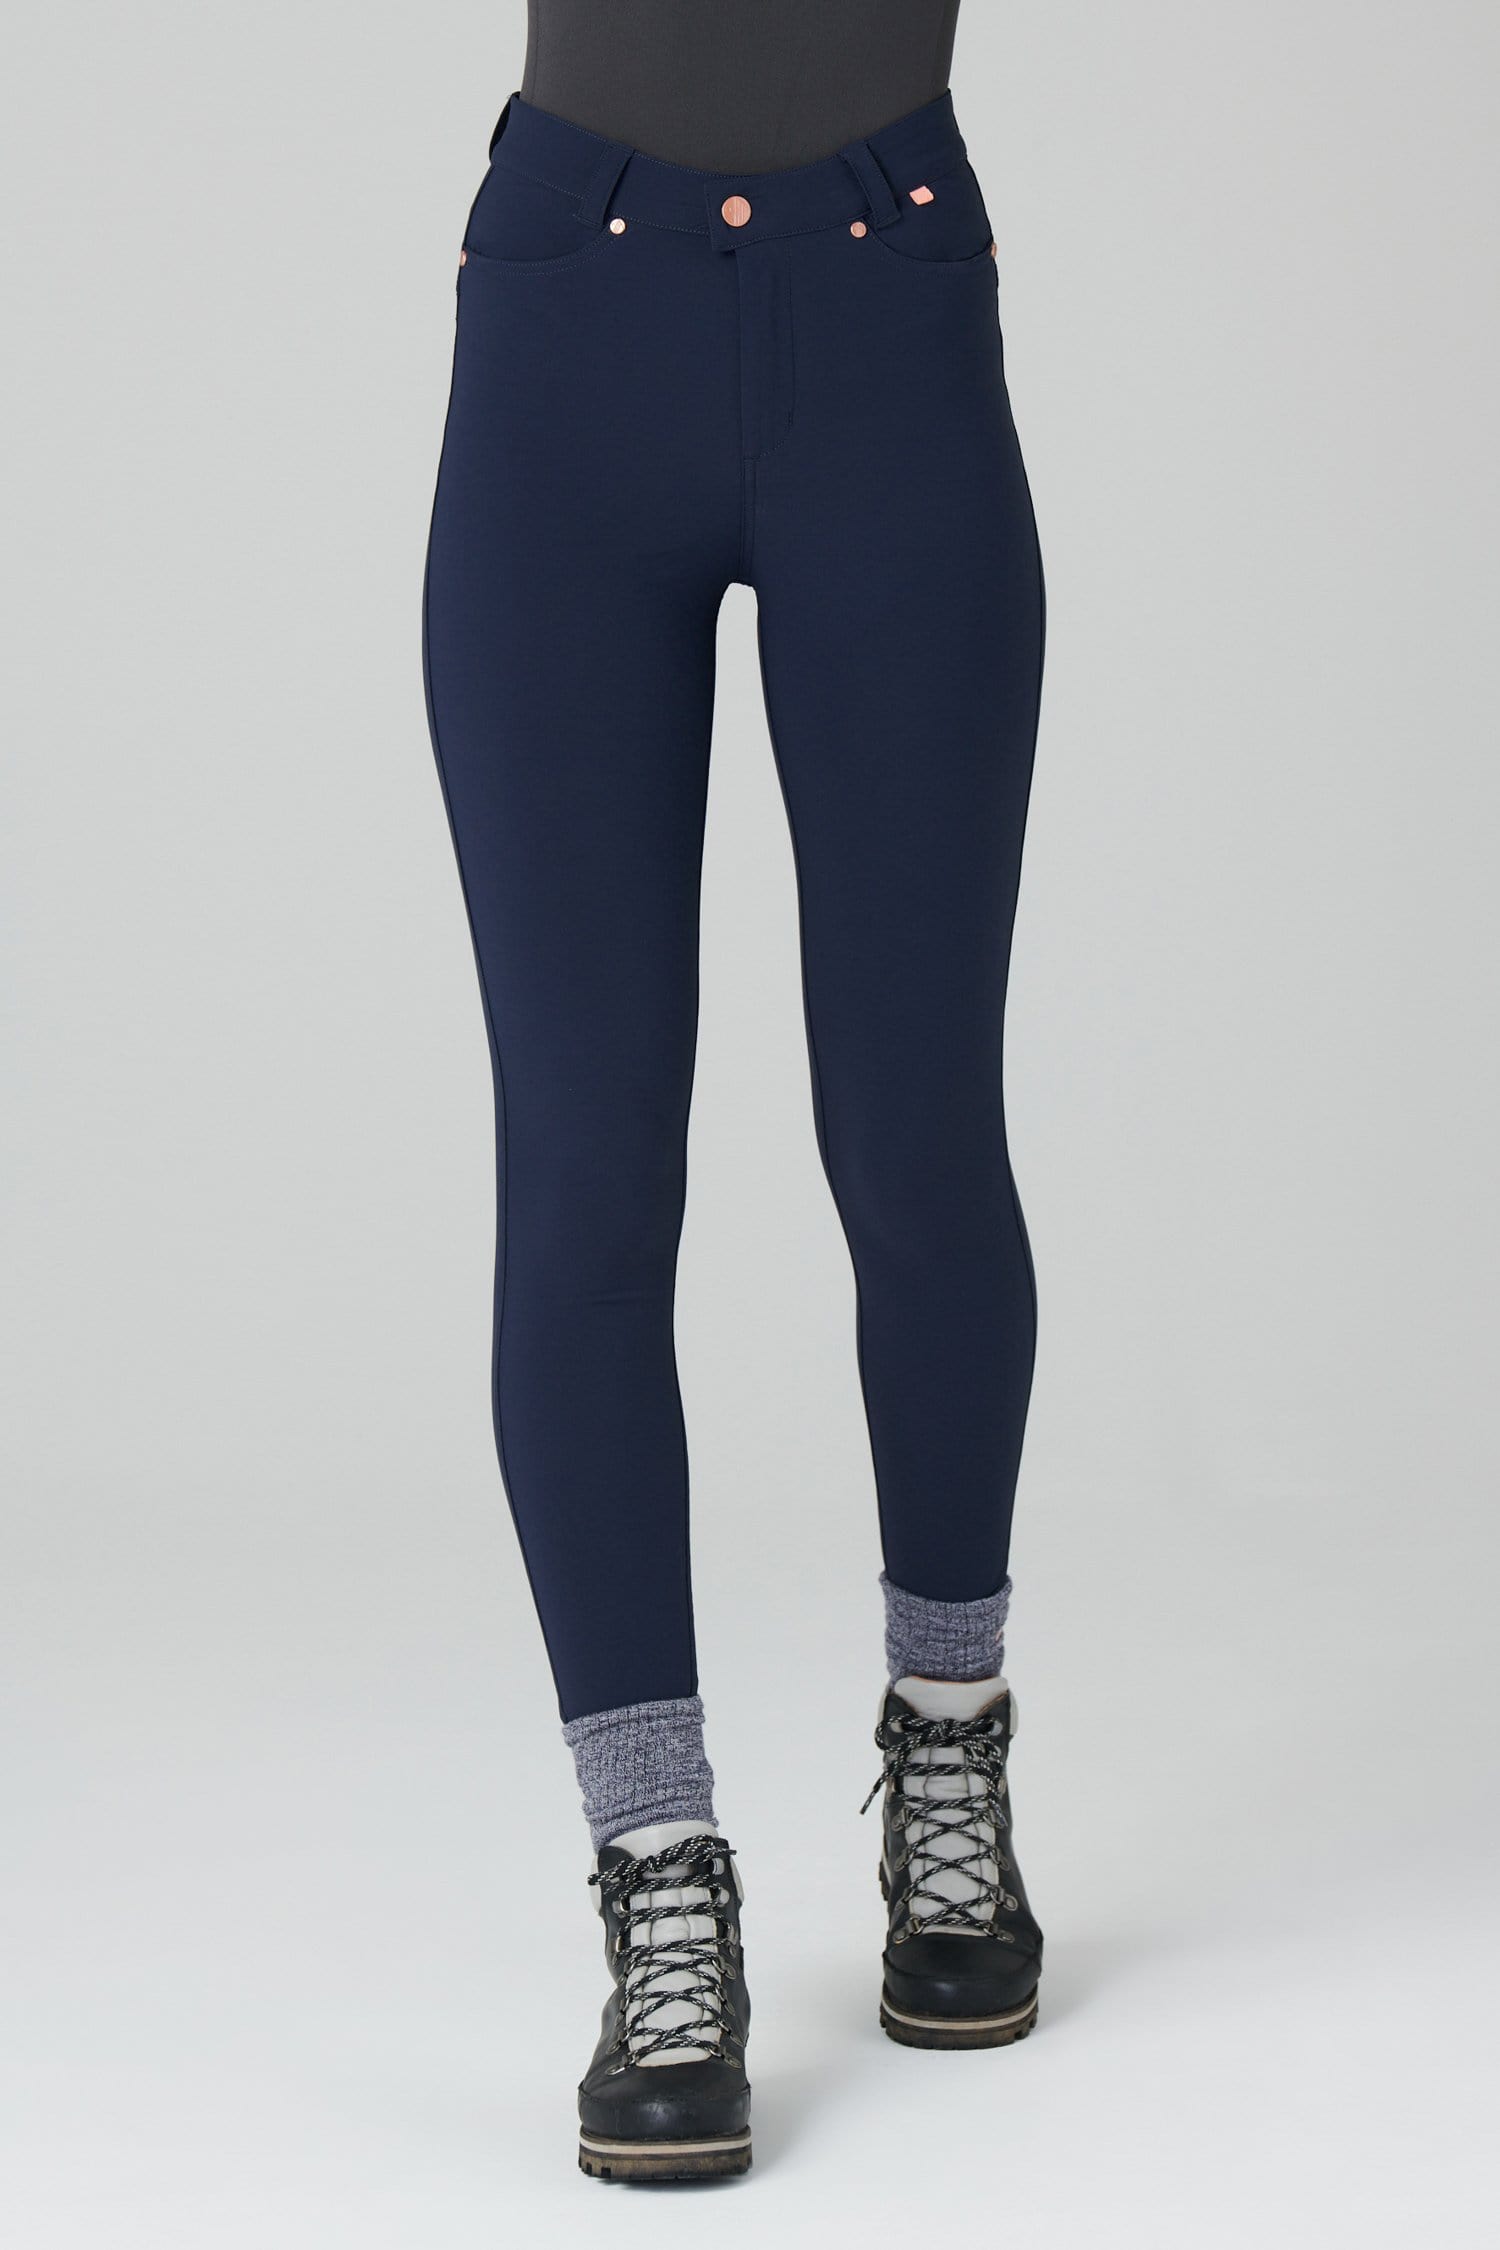 Max Stretch Skinny Outdoor Trousers - Deep Navy - 24r / Uk6 - Womens - Acai Outdoorwear